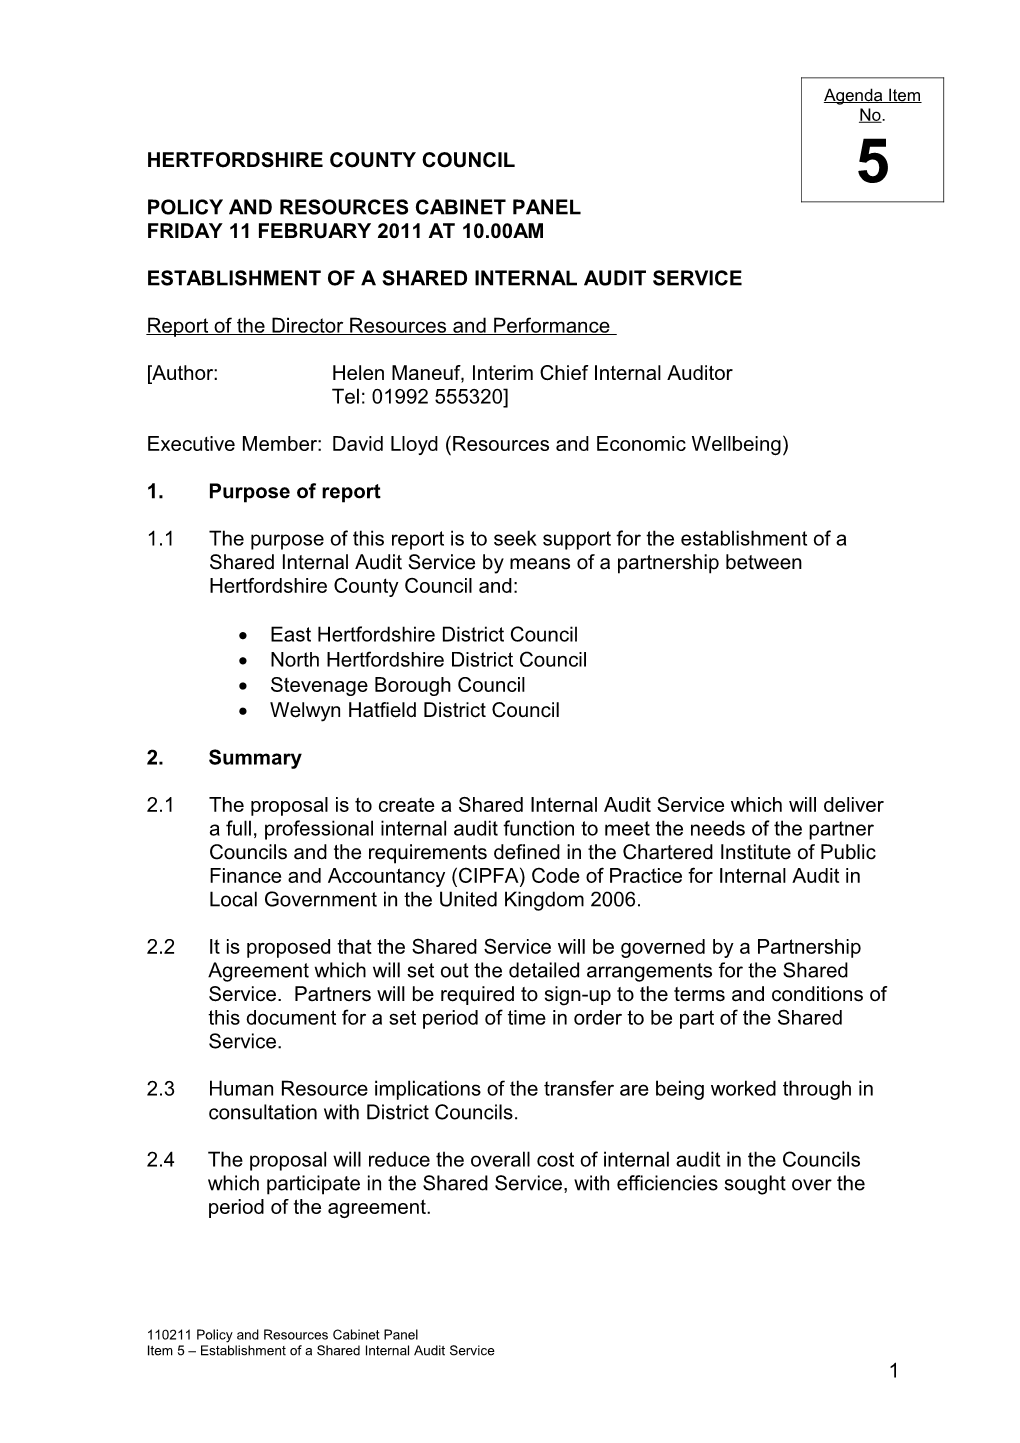 Policy and Resources Cabinet Panel Friday 11 February 2011 at 10.00Am Item 5 - Shared Internal